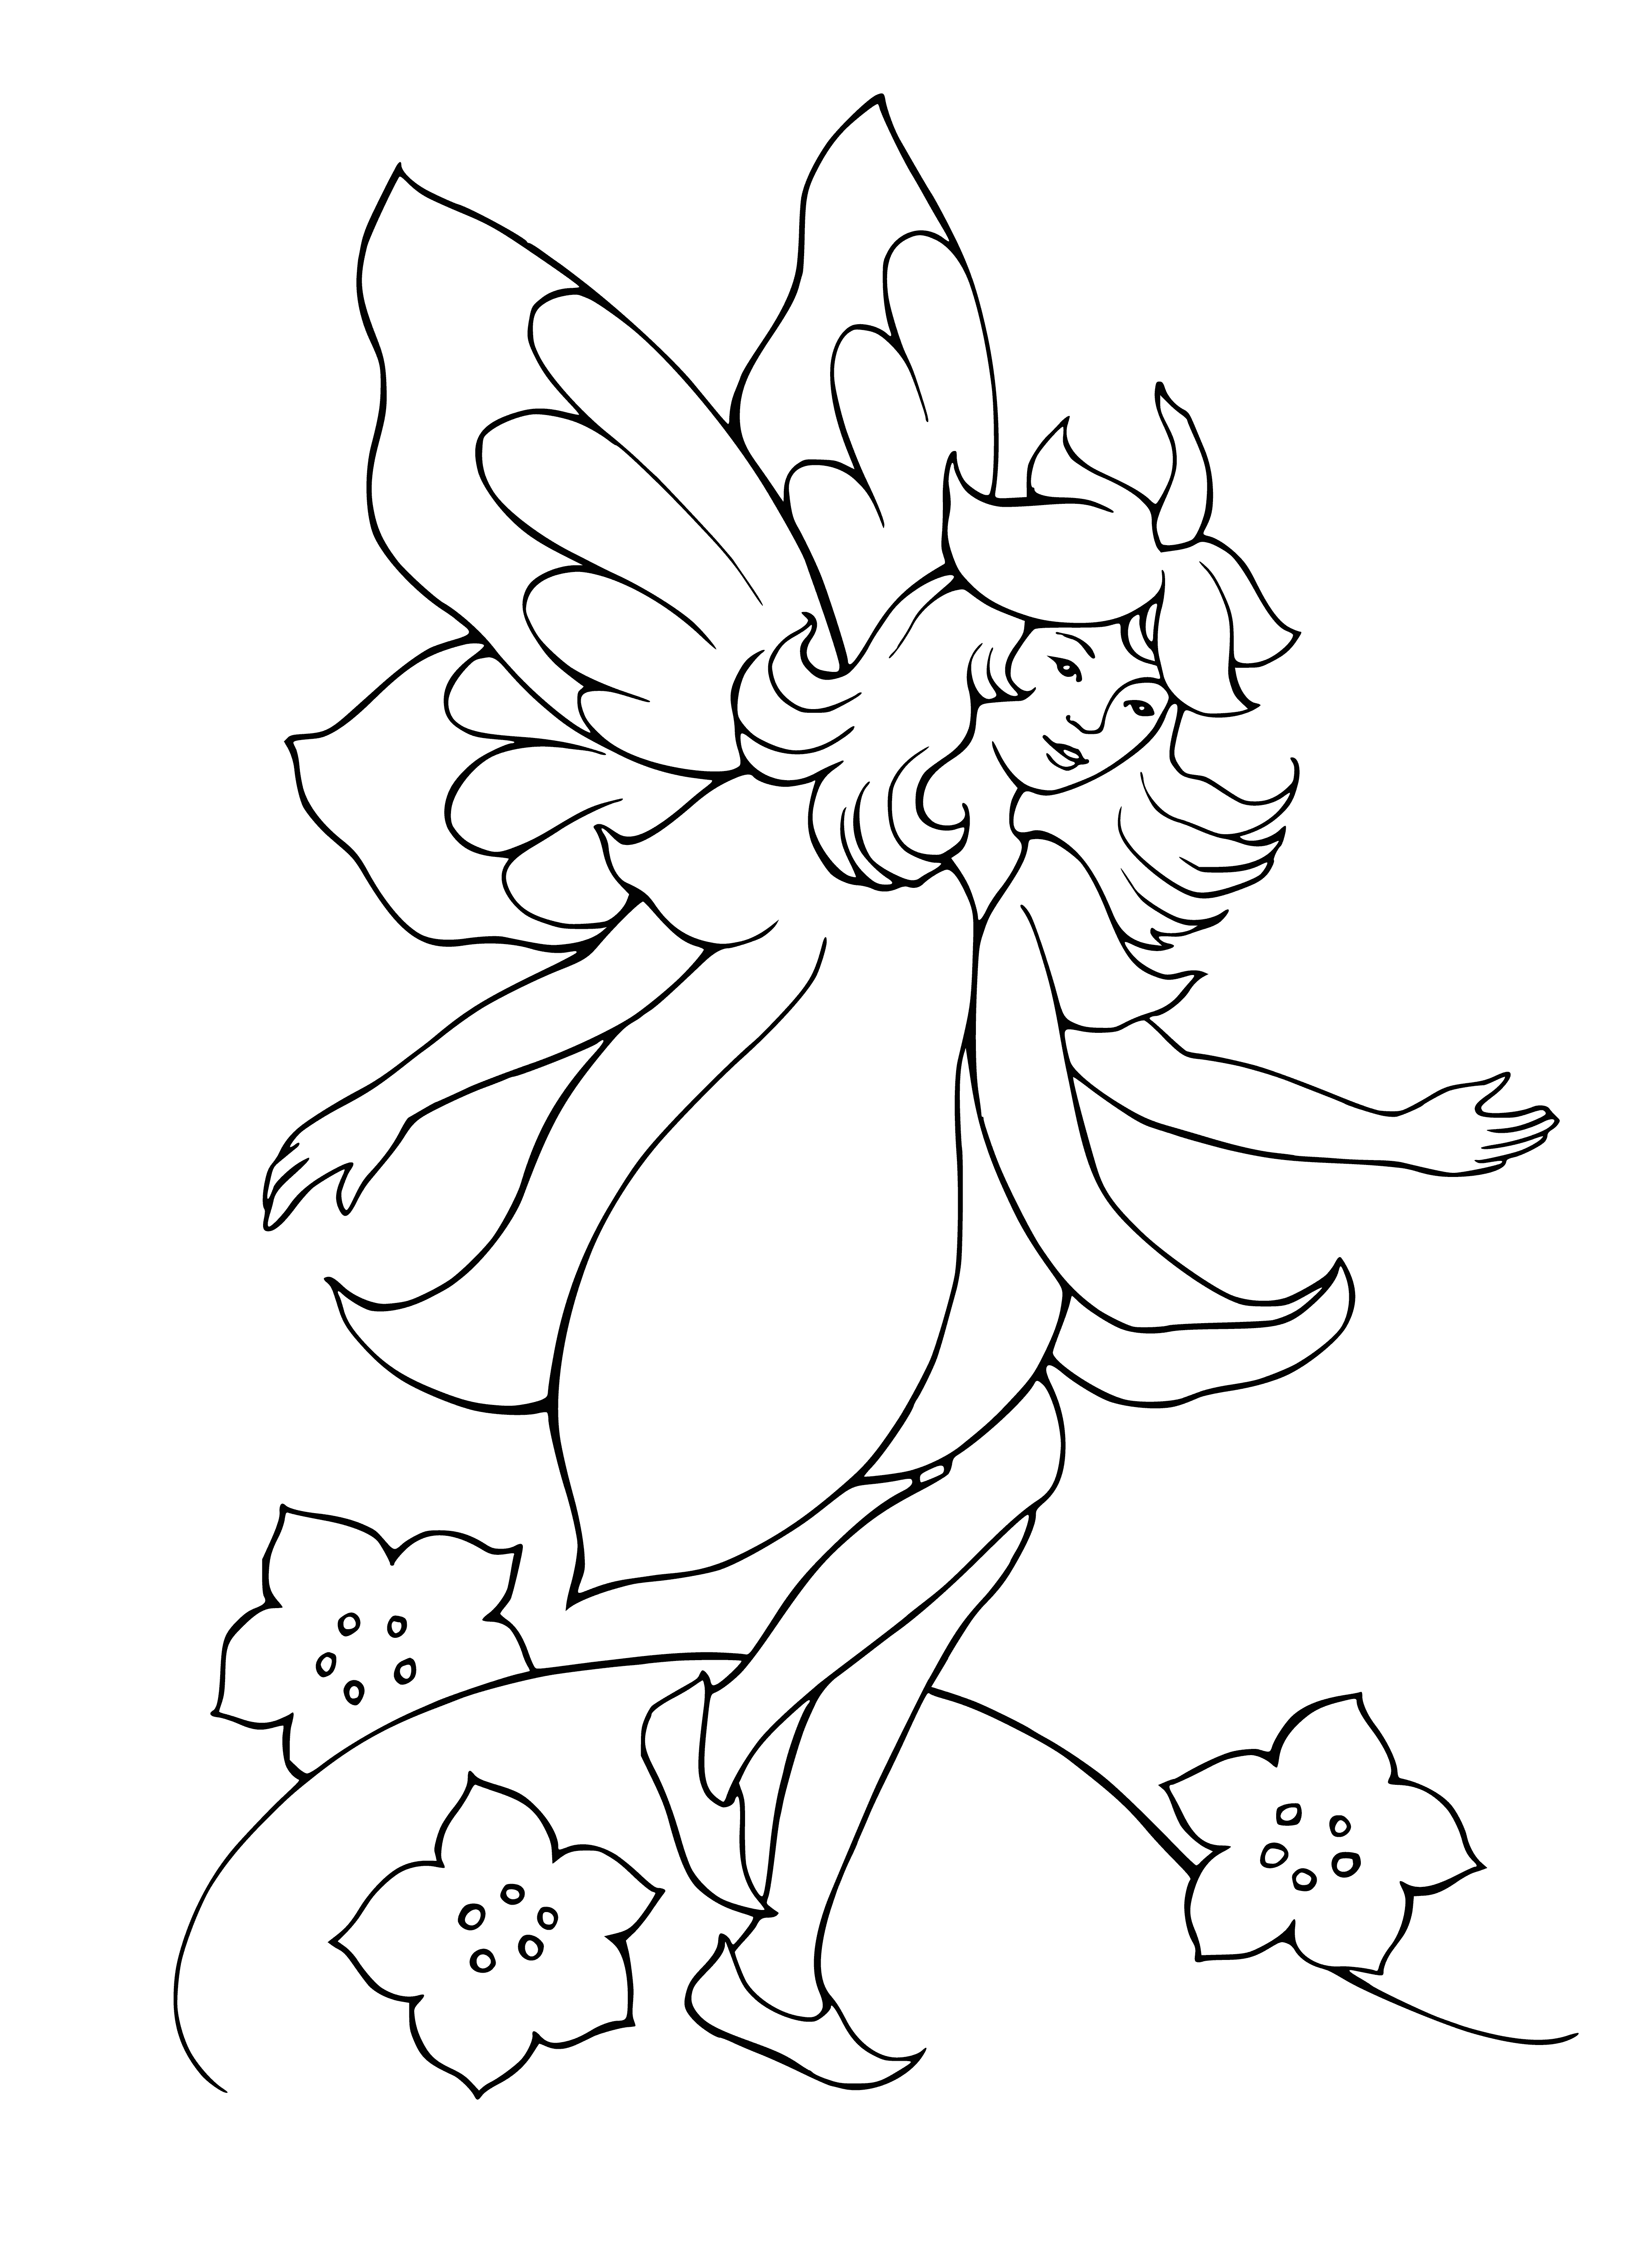 coloring page: Fairy in petal dress stands in tall grass, sun behind casting long shadow, wings of gossamer, hair of spun gold, and holds a flower.